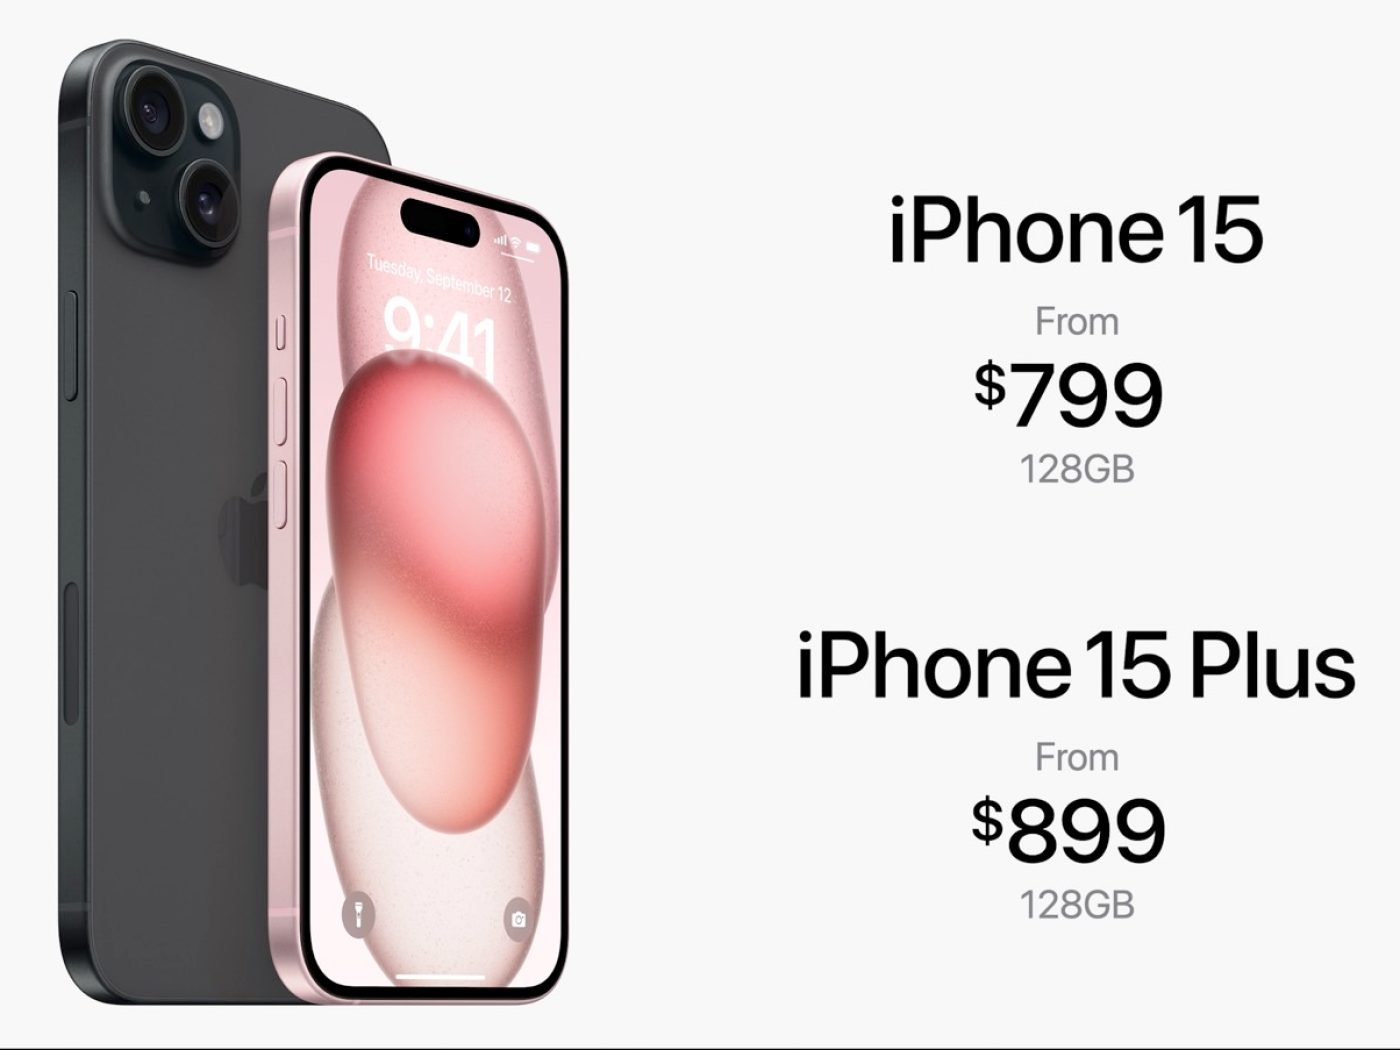 iPhone 9 could cost more than you expect [UPDATED]